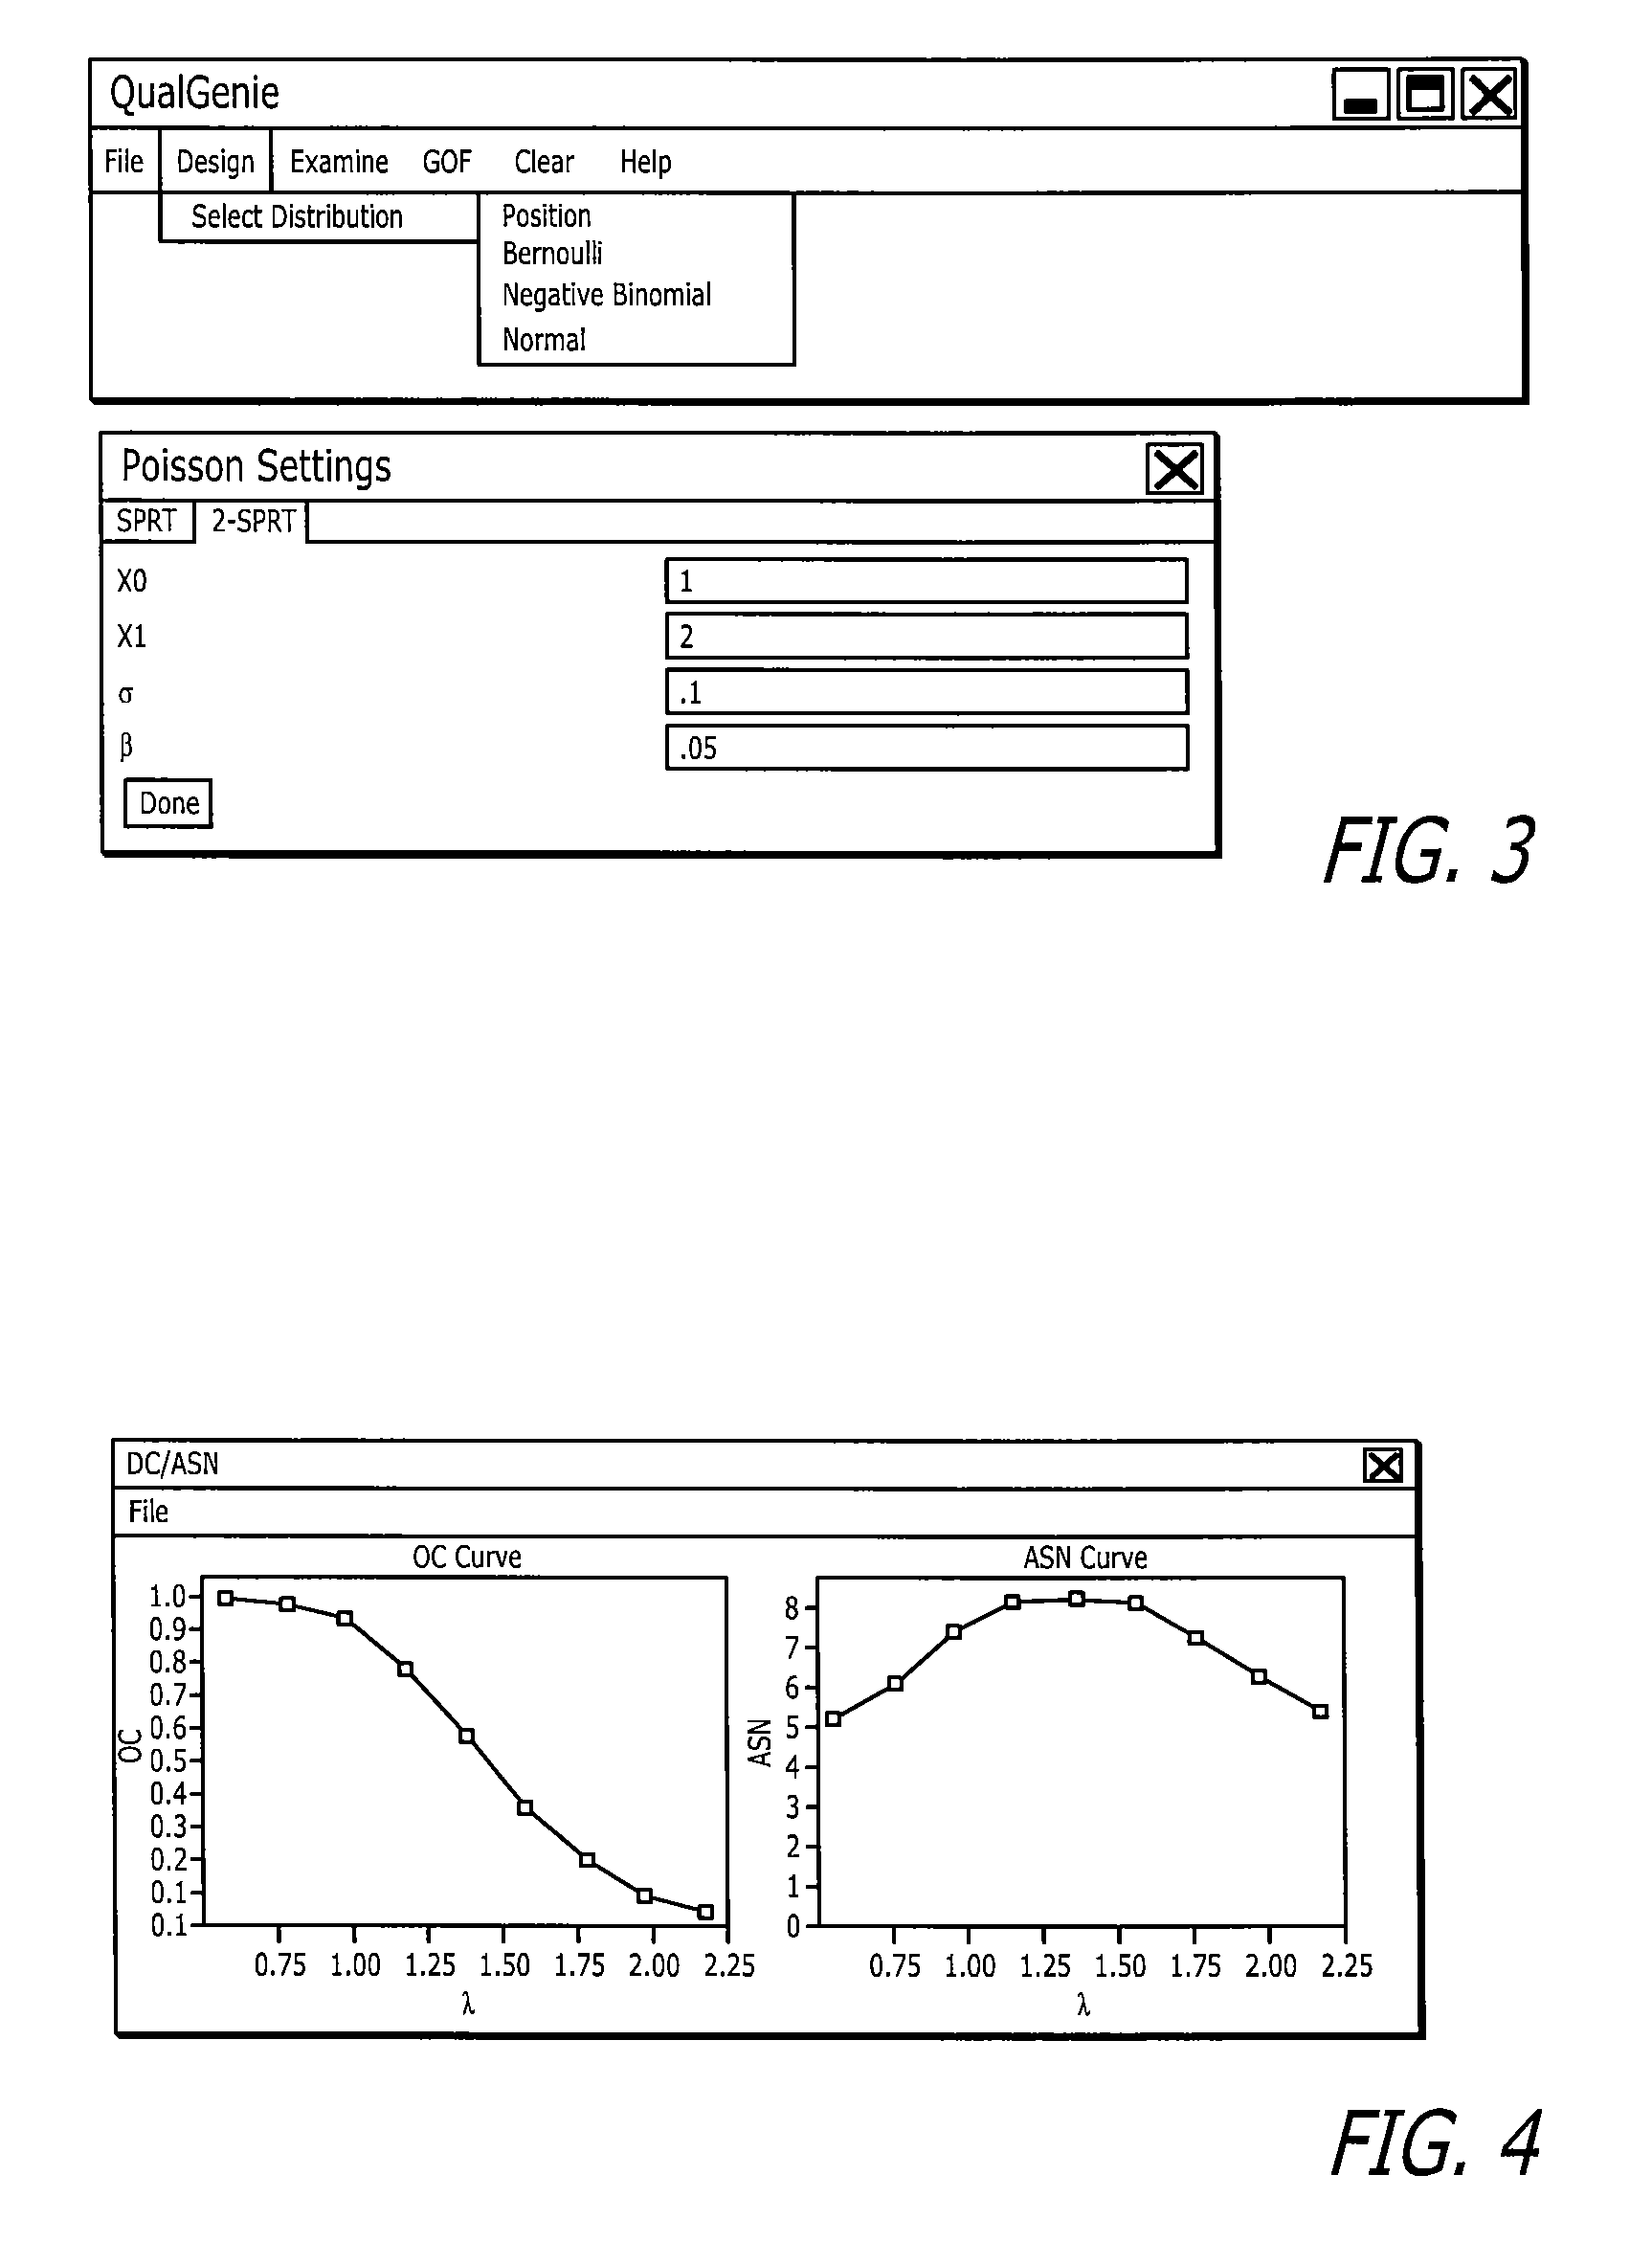 Sequential sampling within a portable computing environment